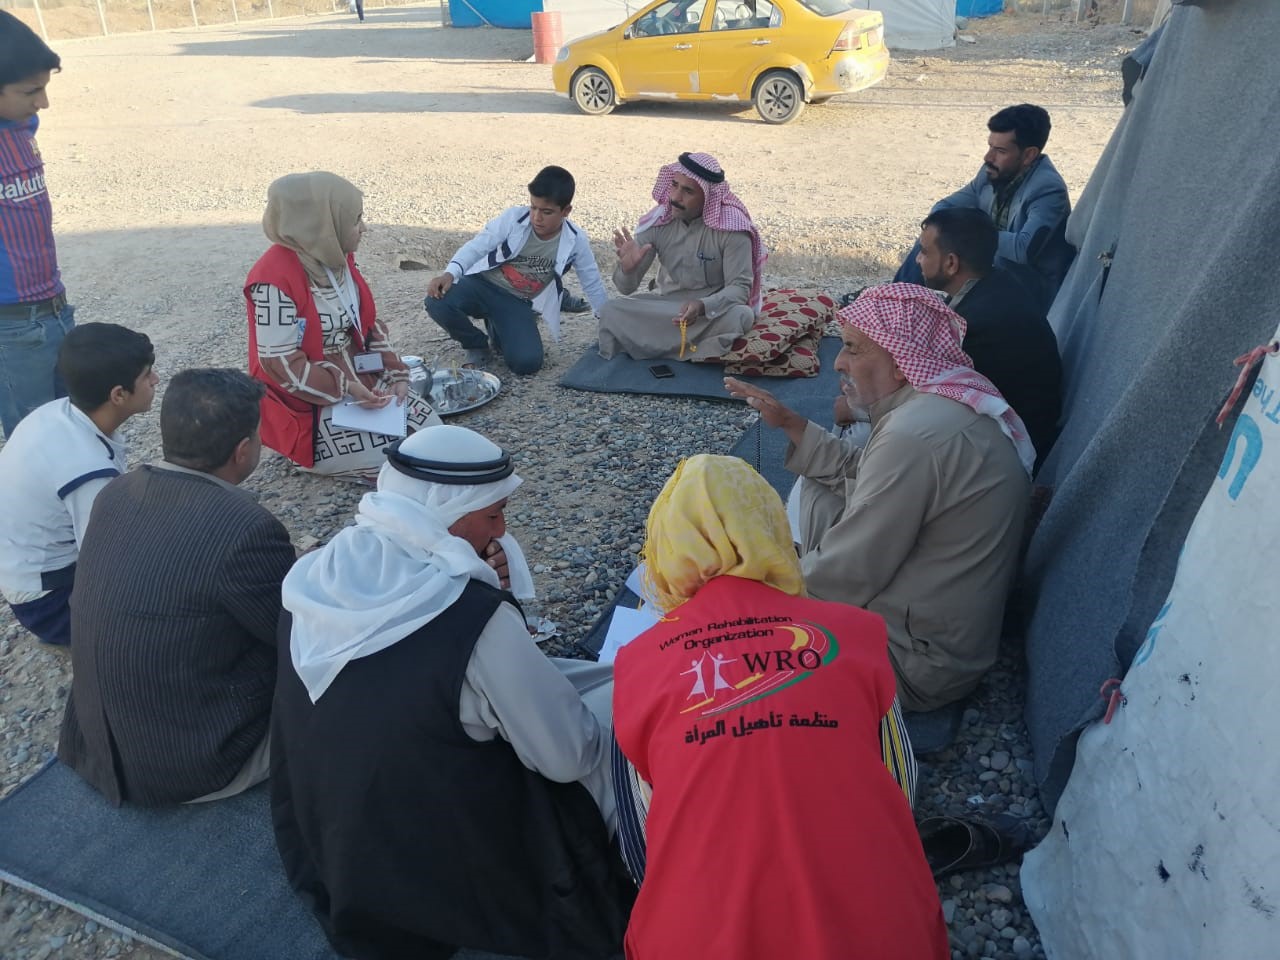 Combating protracted psychosocial challenges for GBV survivors and enhancing community support for GBV prevention in Salamiyah Camp